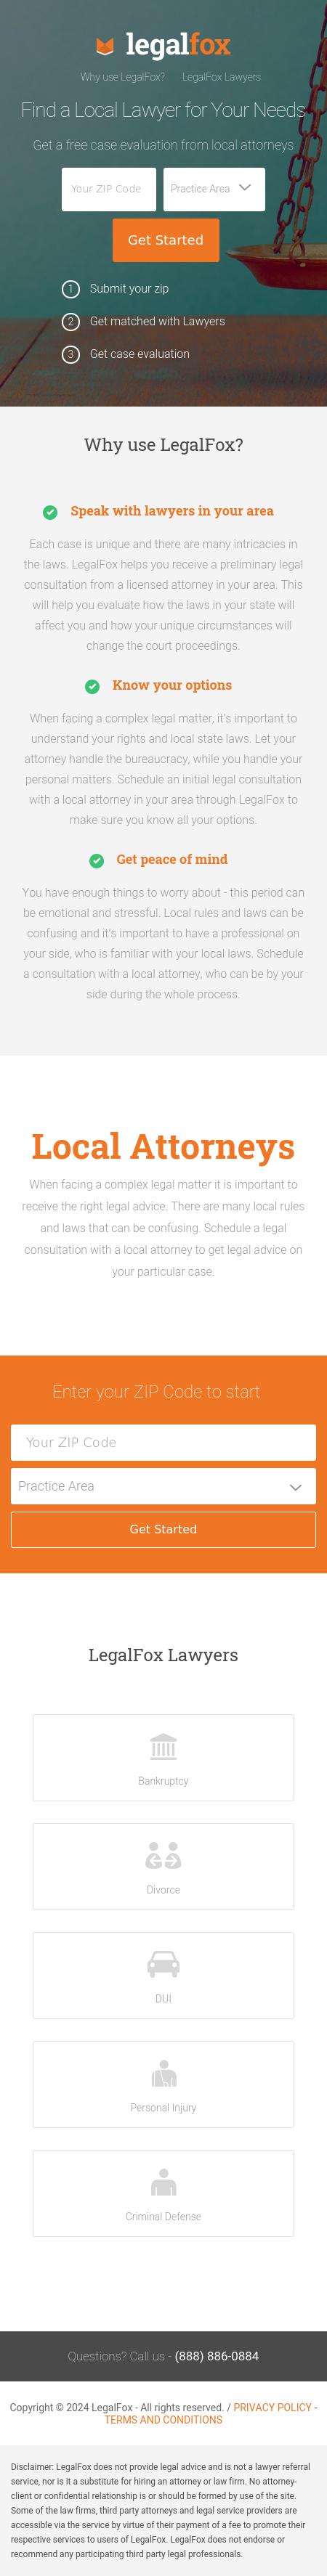 Find a Local Attorney - Jersey City NJ Lawyers